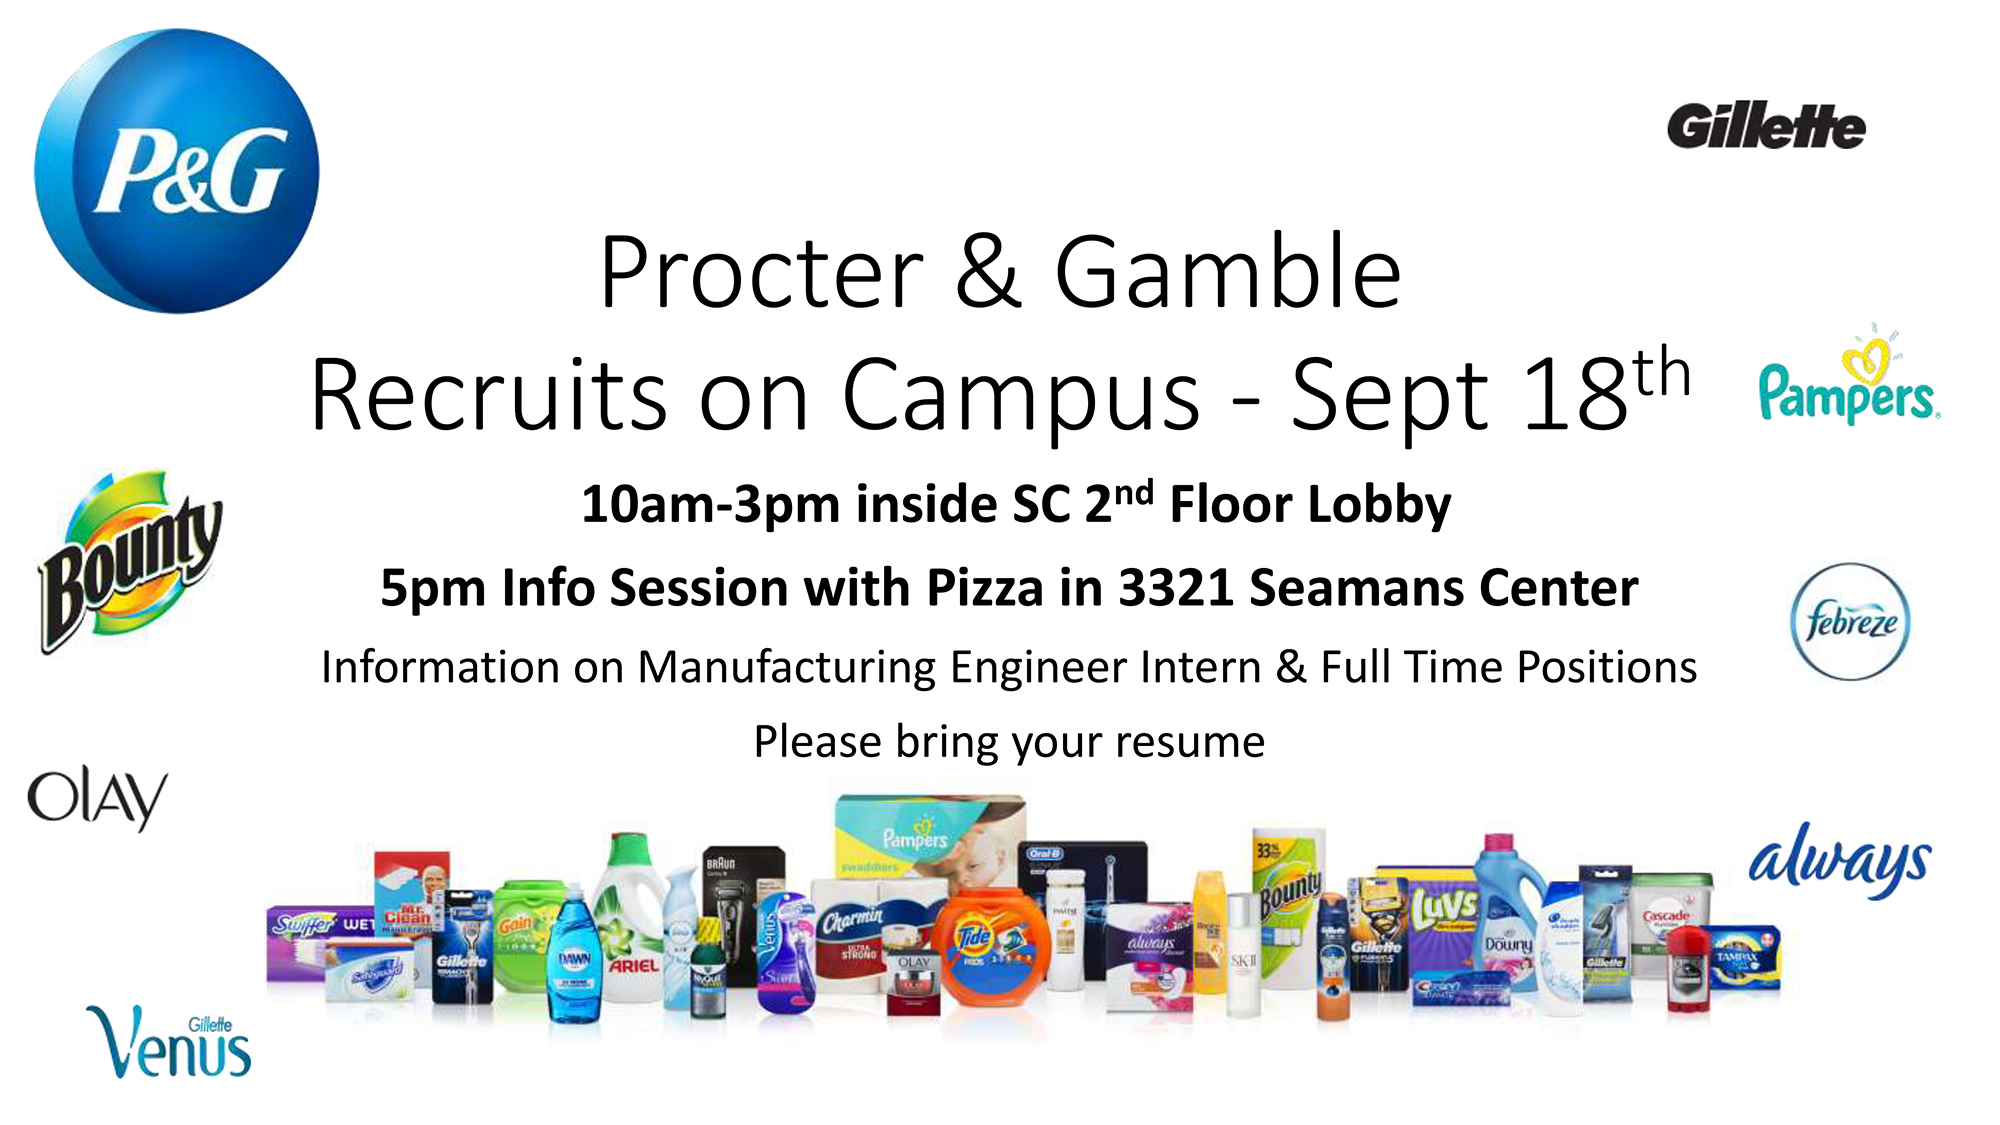 Procter & Gamble- Recruits on Campus